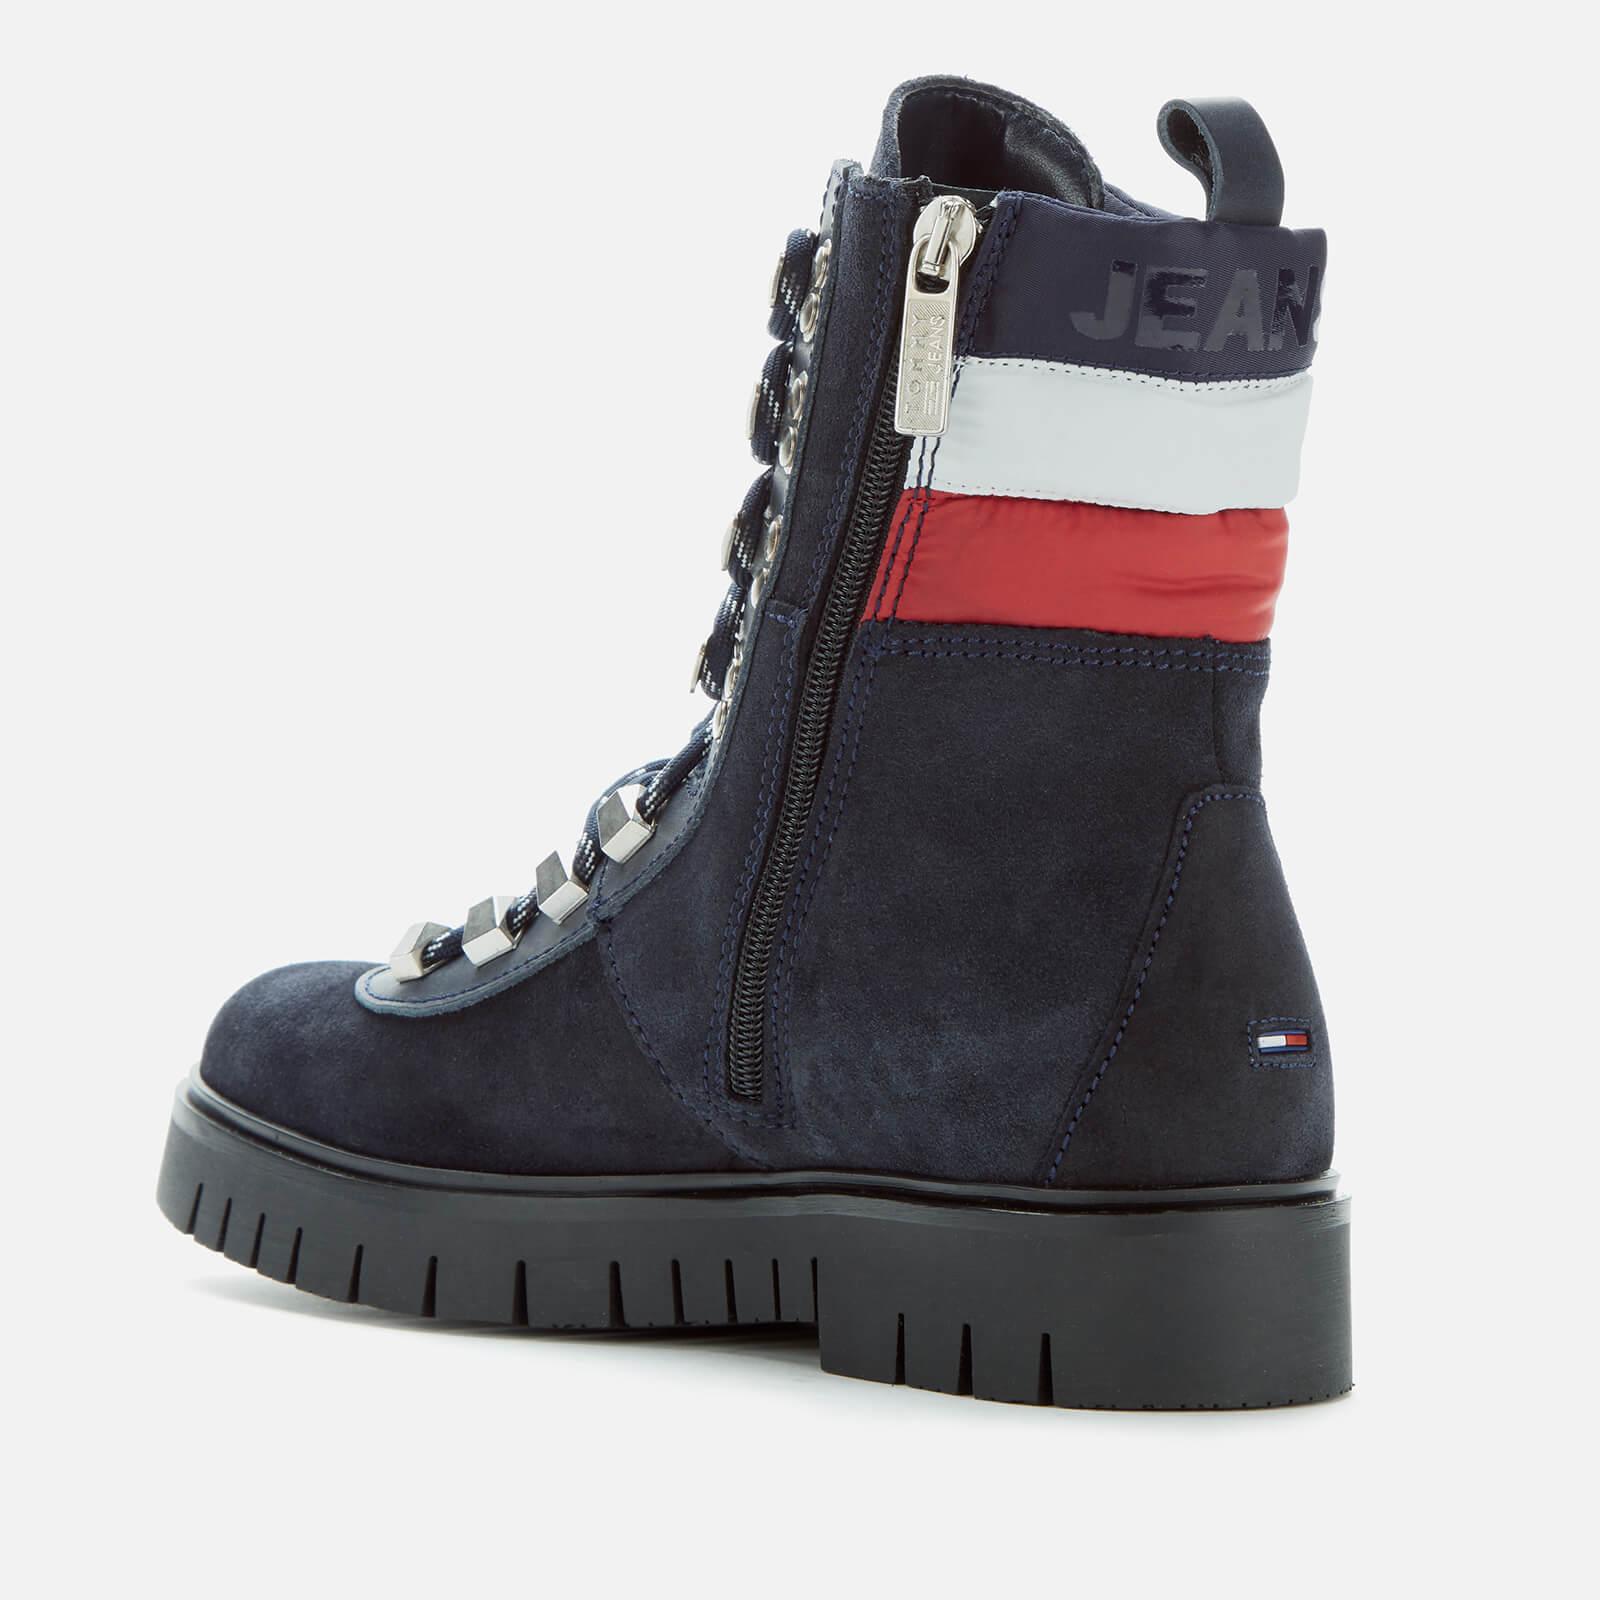 Tommy Hilfiger Padded Nylon Lace Up Boot Hotsell, SAVE 32% - aveclumiere.com